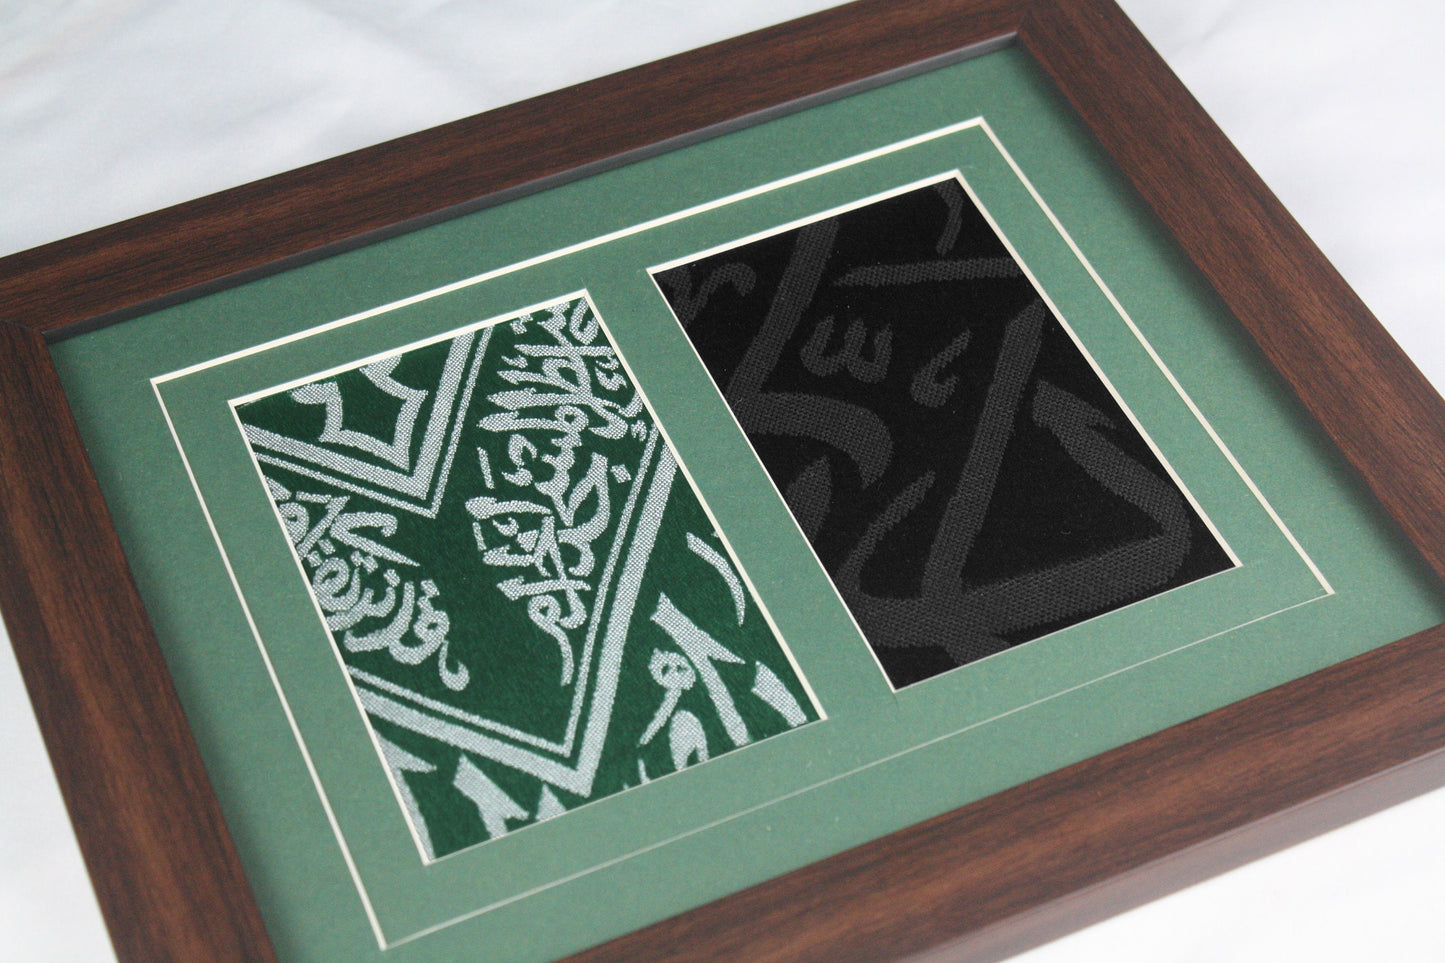 Islam Wall Decor For Mosque and Praying Room / Original Holy Kaabah Inside and External Covering Cloth Fragements /